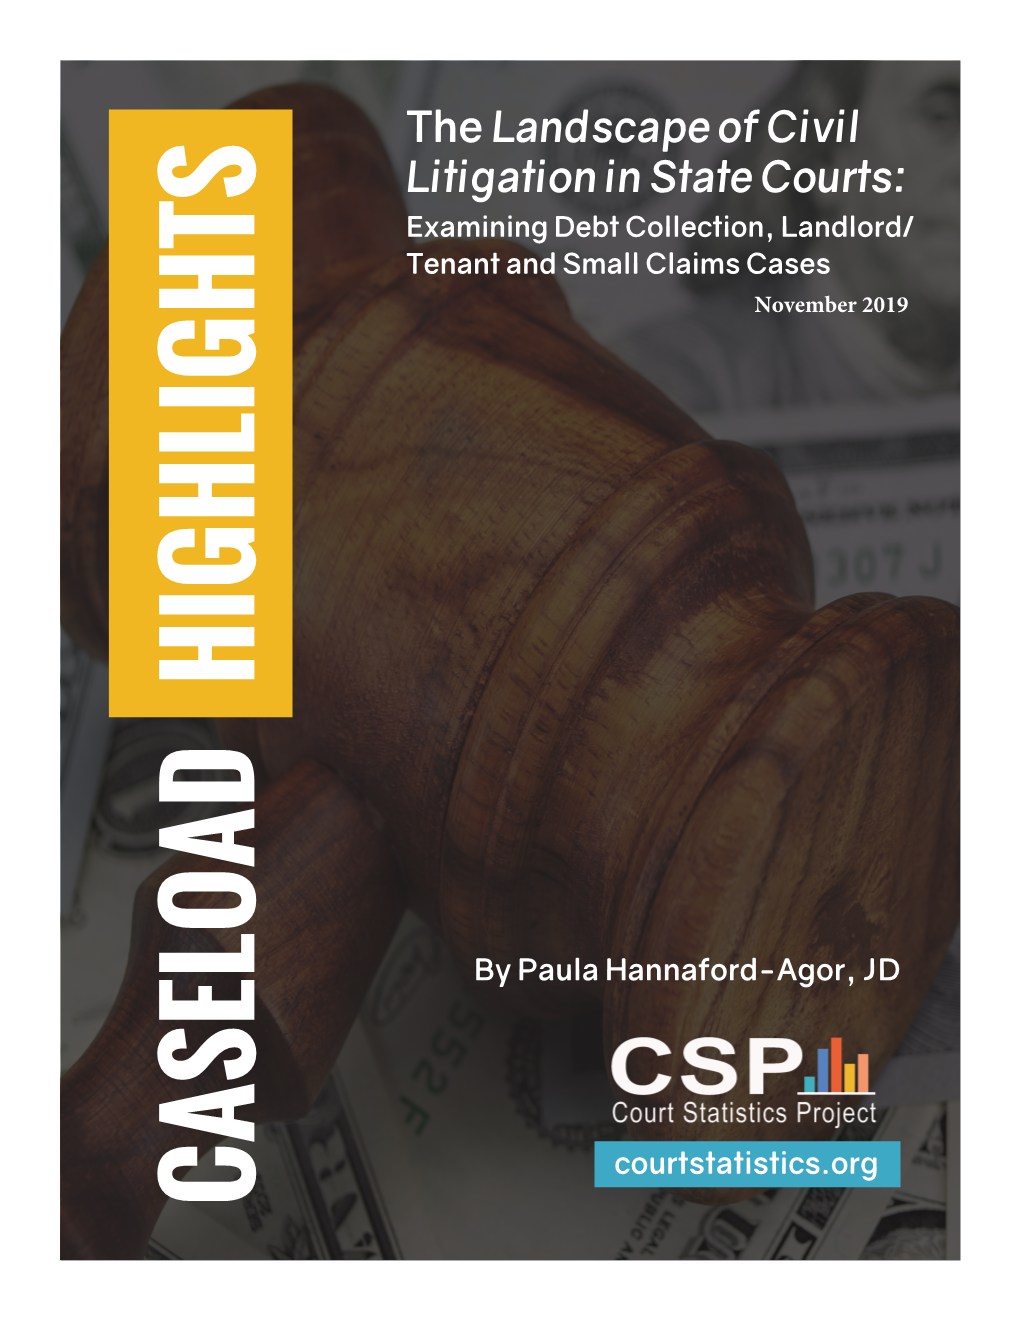 The Landscape of Civil Litigation in State Courts